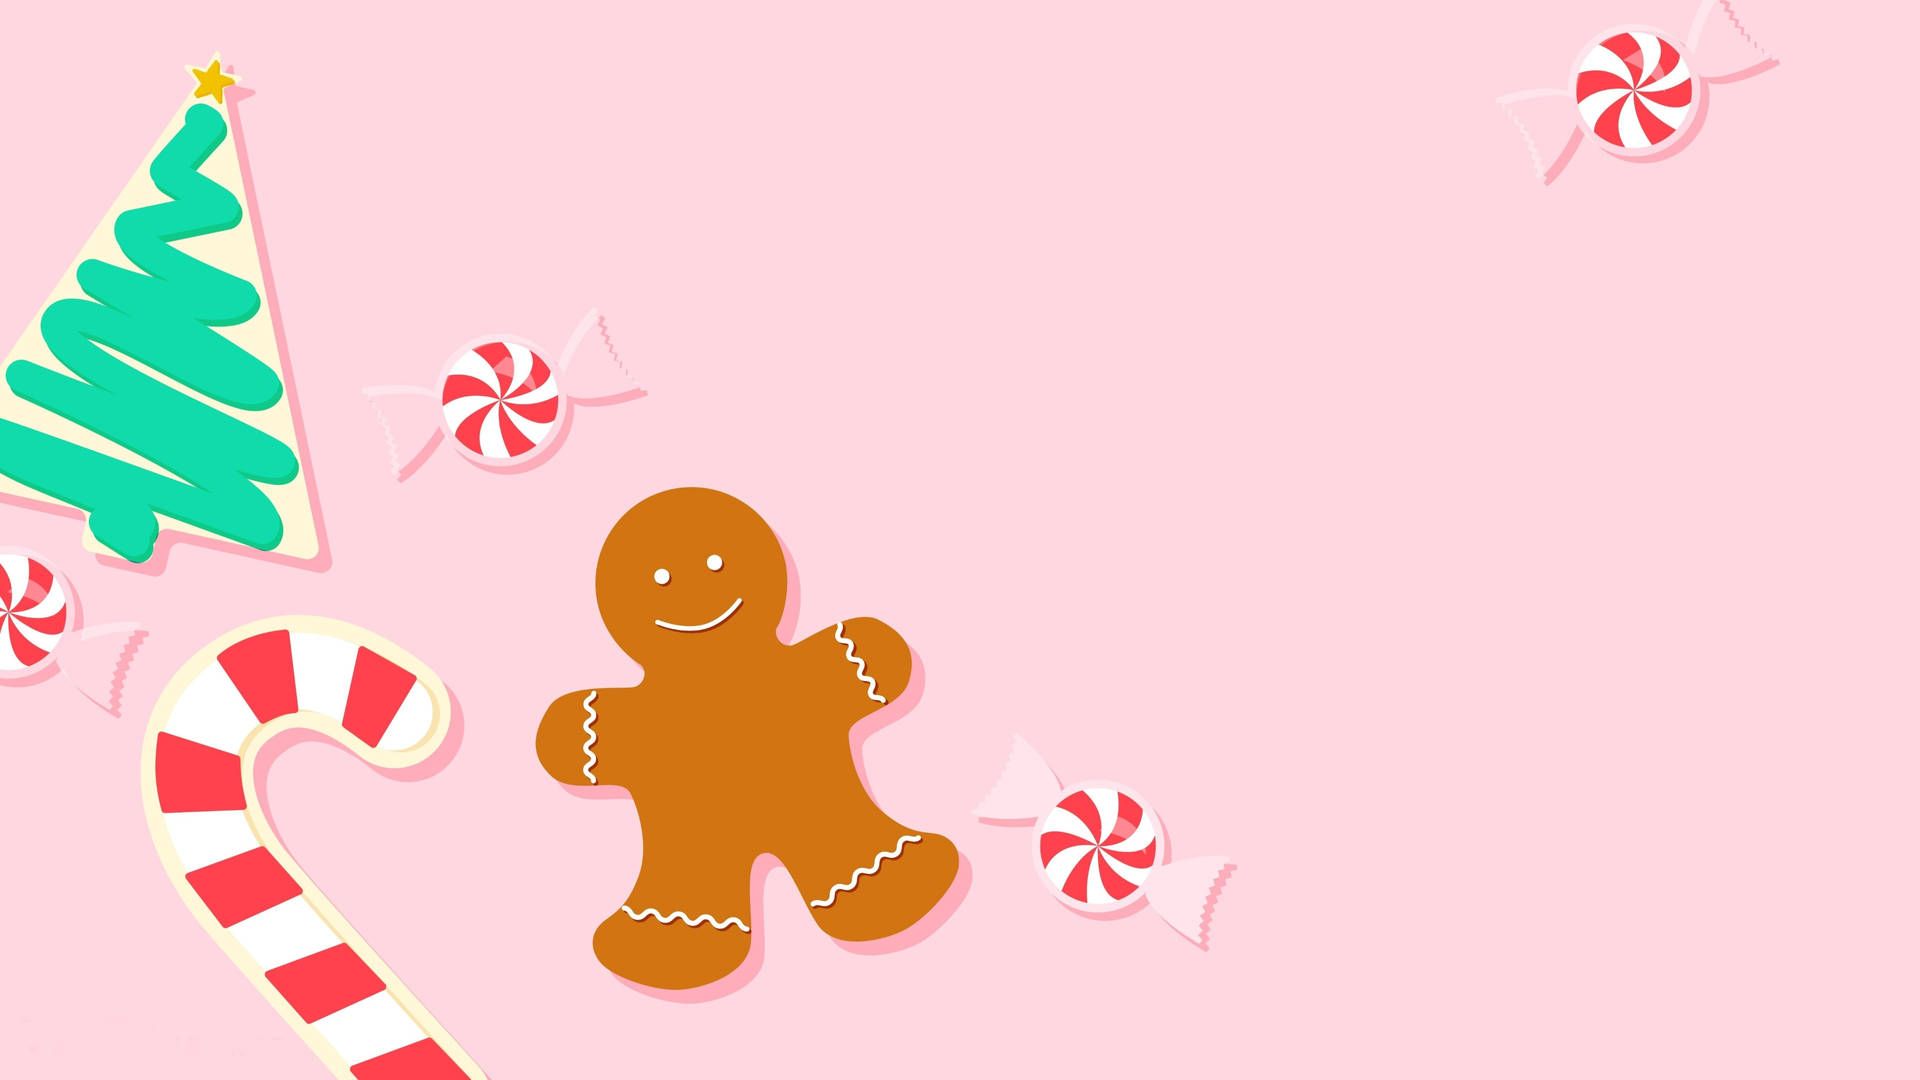 A christmas scene with candy canes and gingerbread man - Christmas, cute Christmas, candy cane